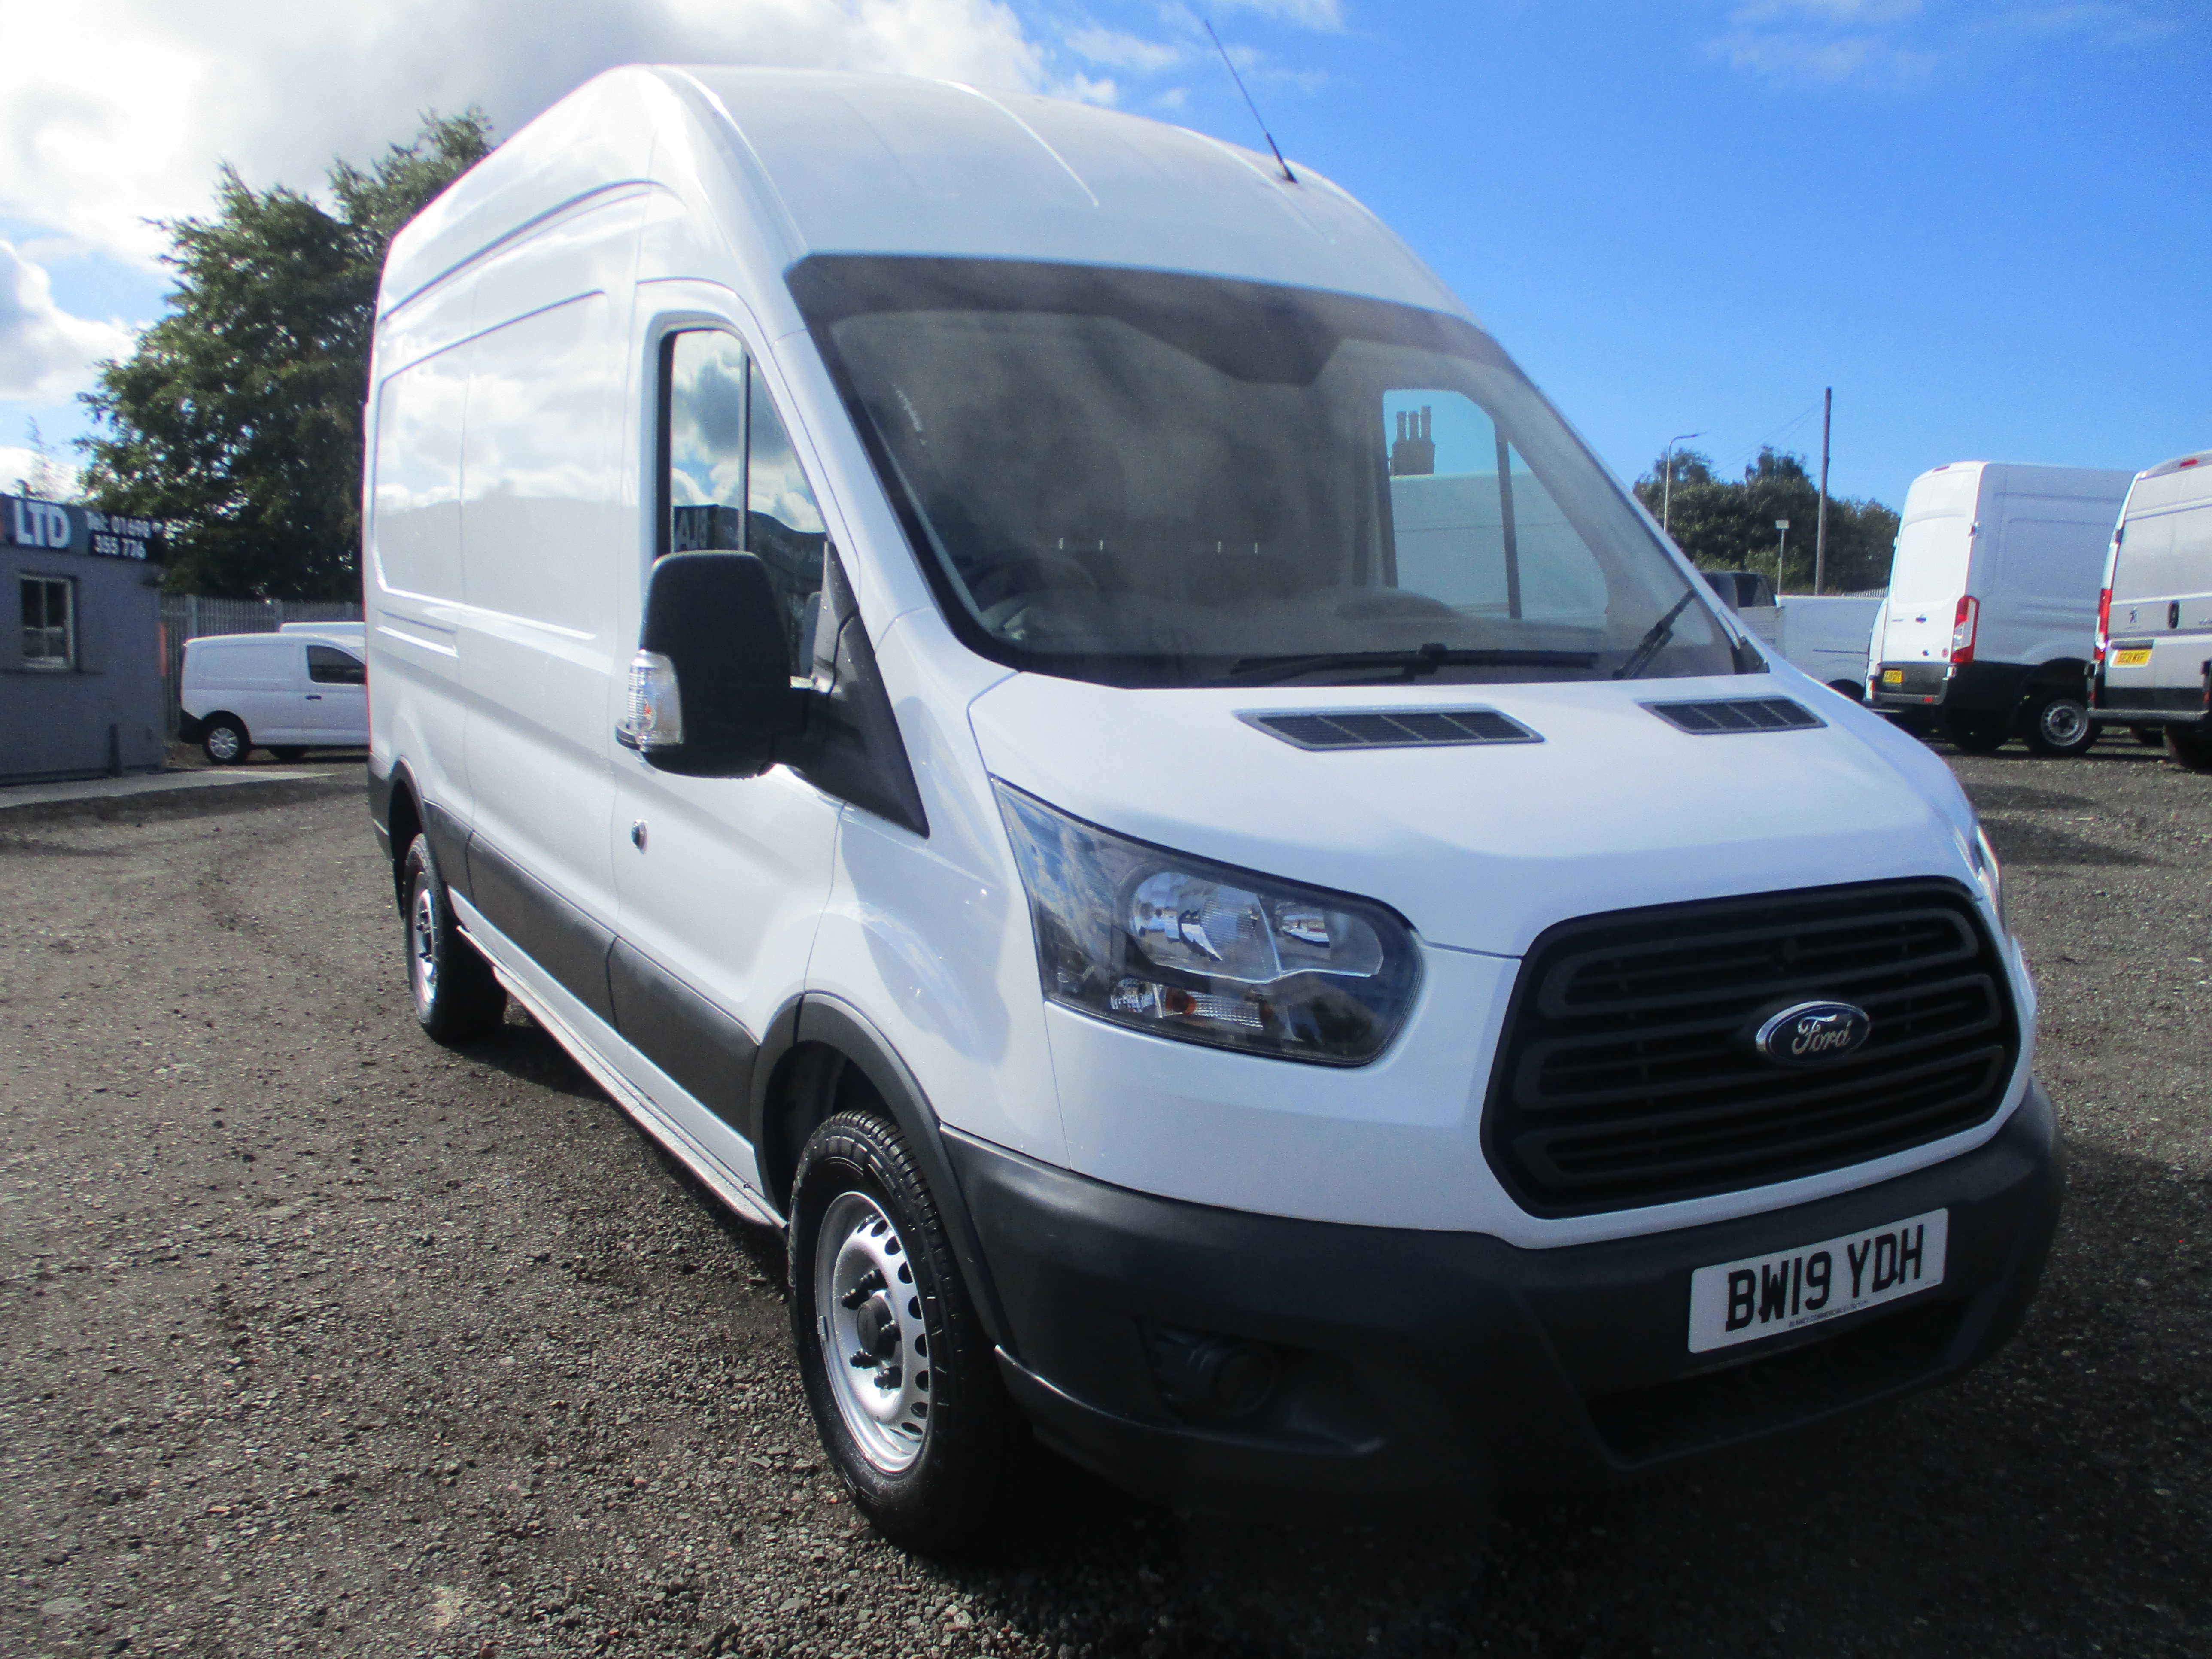 Ford Transit 350 L3H3 2.0TDCI 130PS LWB Hi Roof Panel Van with AIR CON